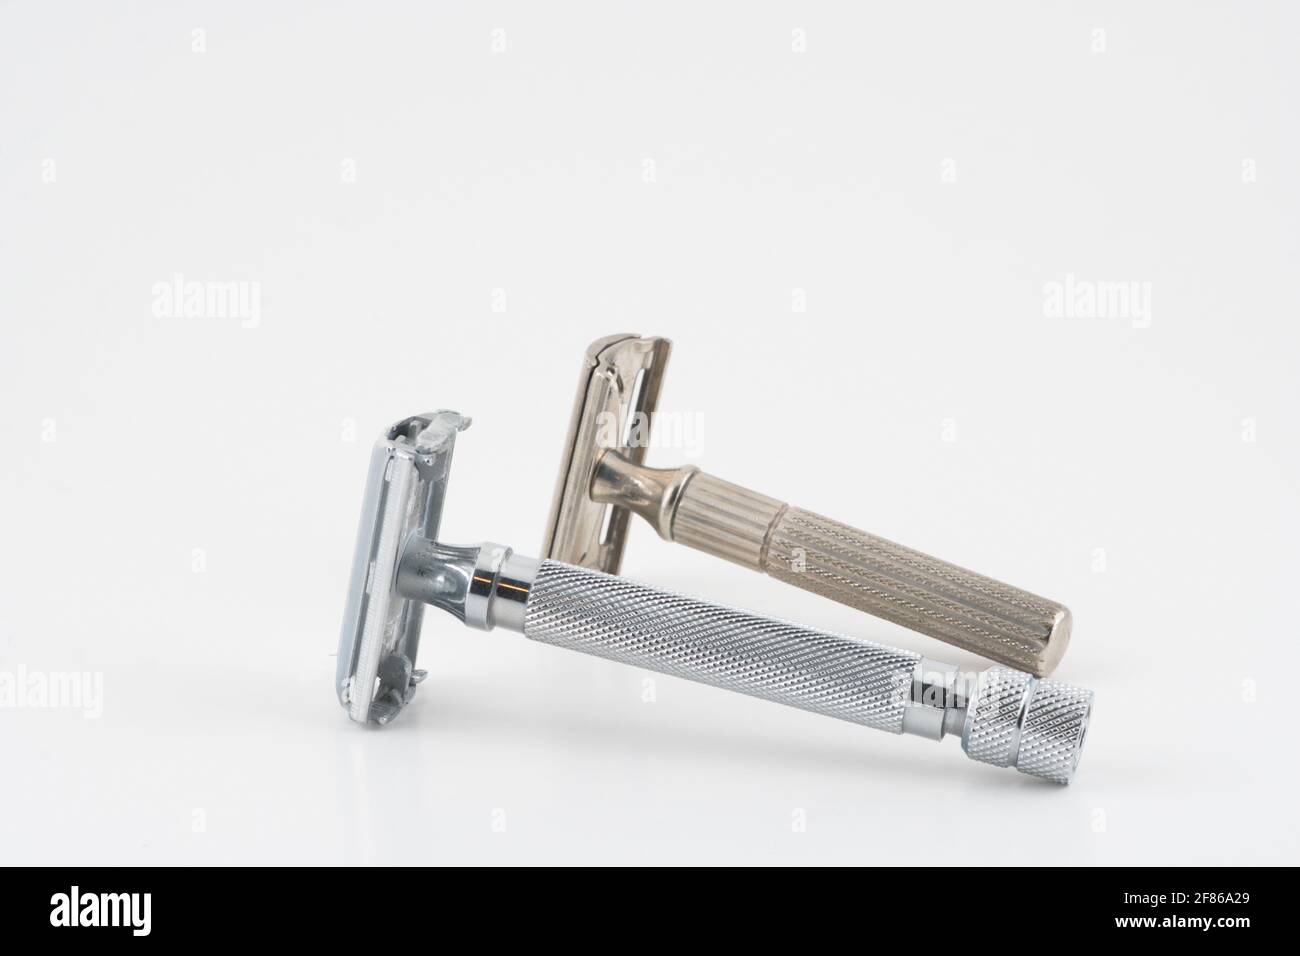 Vintage double edge safety razor for shaving, metal, nickle, and chrome. On white isolated background Stock Photo